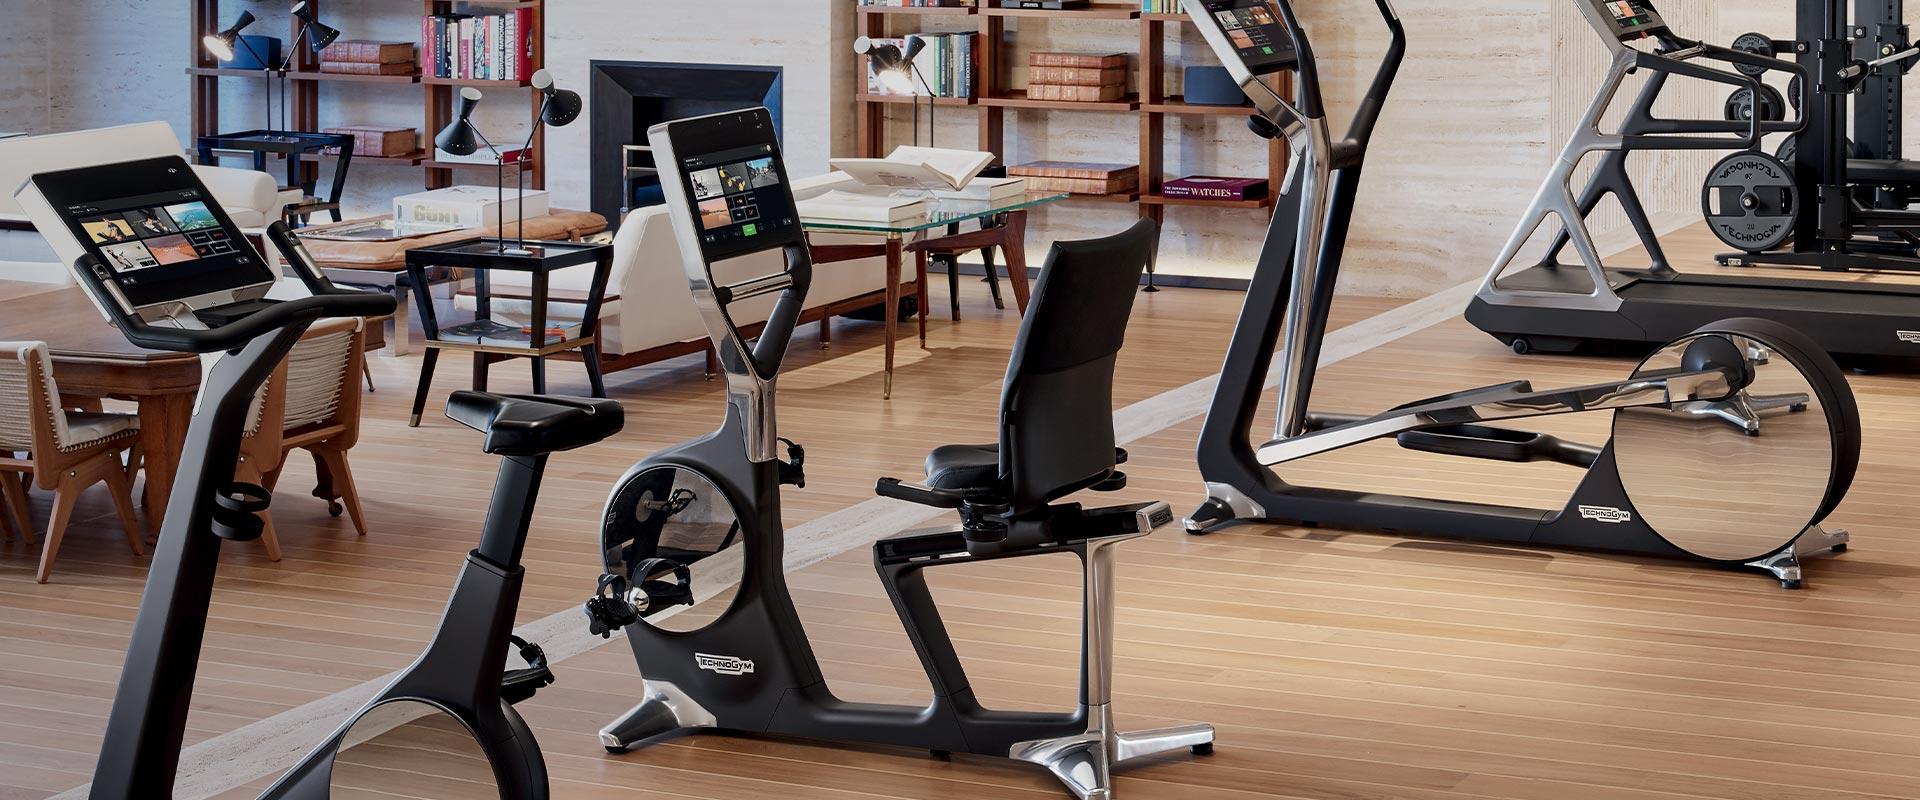 Technogym, Rumble and SB Projects create “At Home 360” to distribute fitness products with on-board Rumble classes in the home market in North America